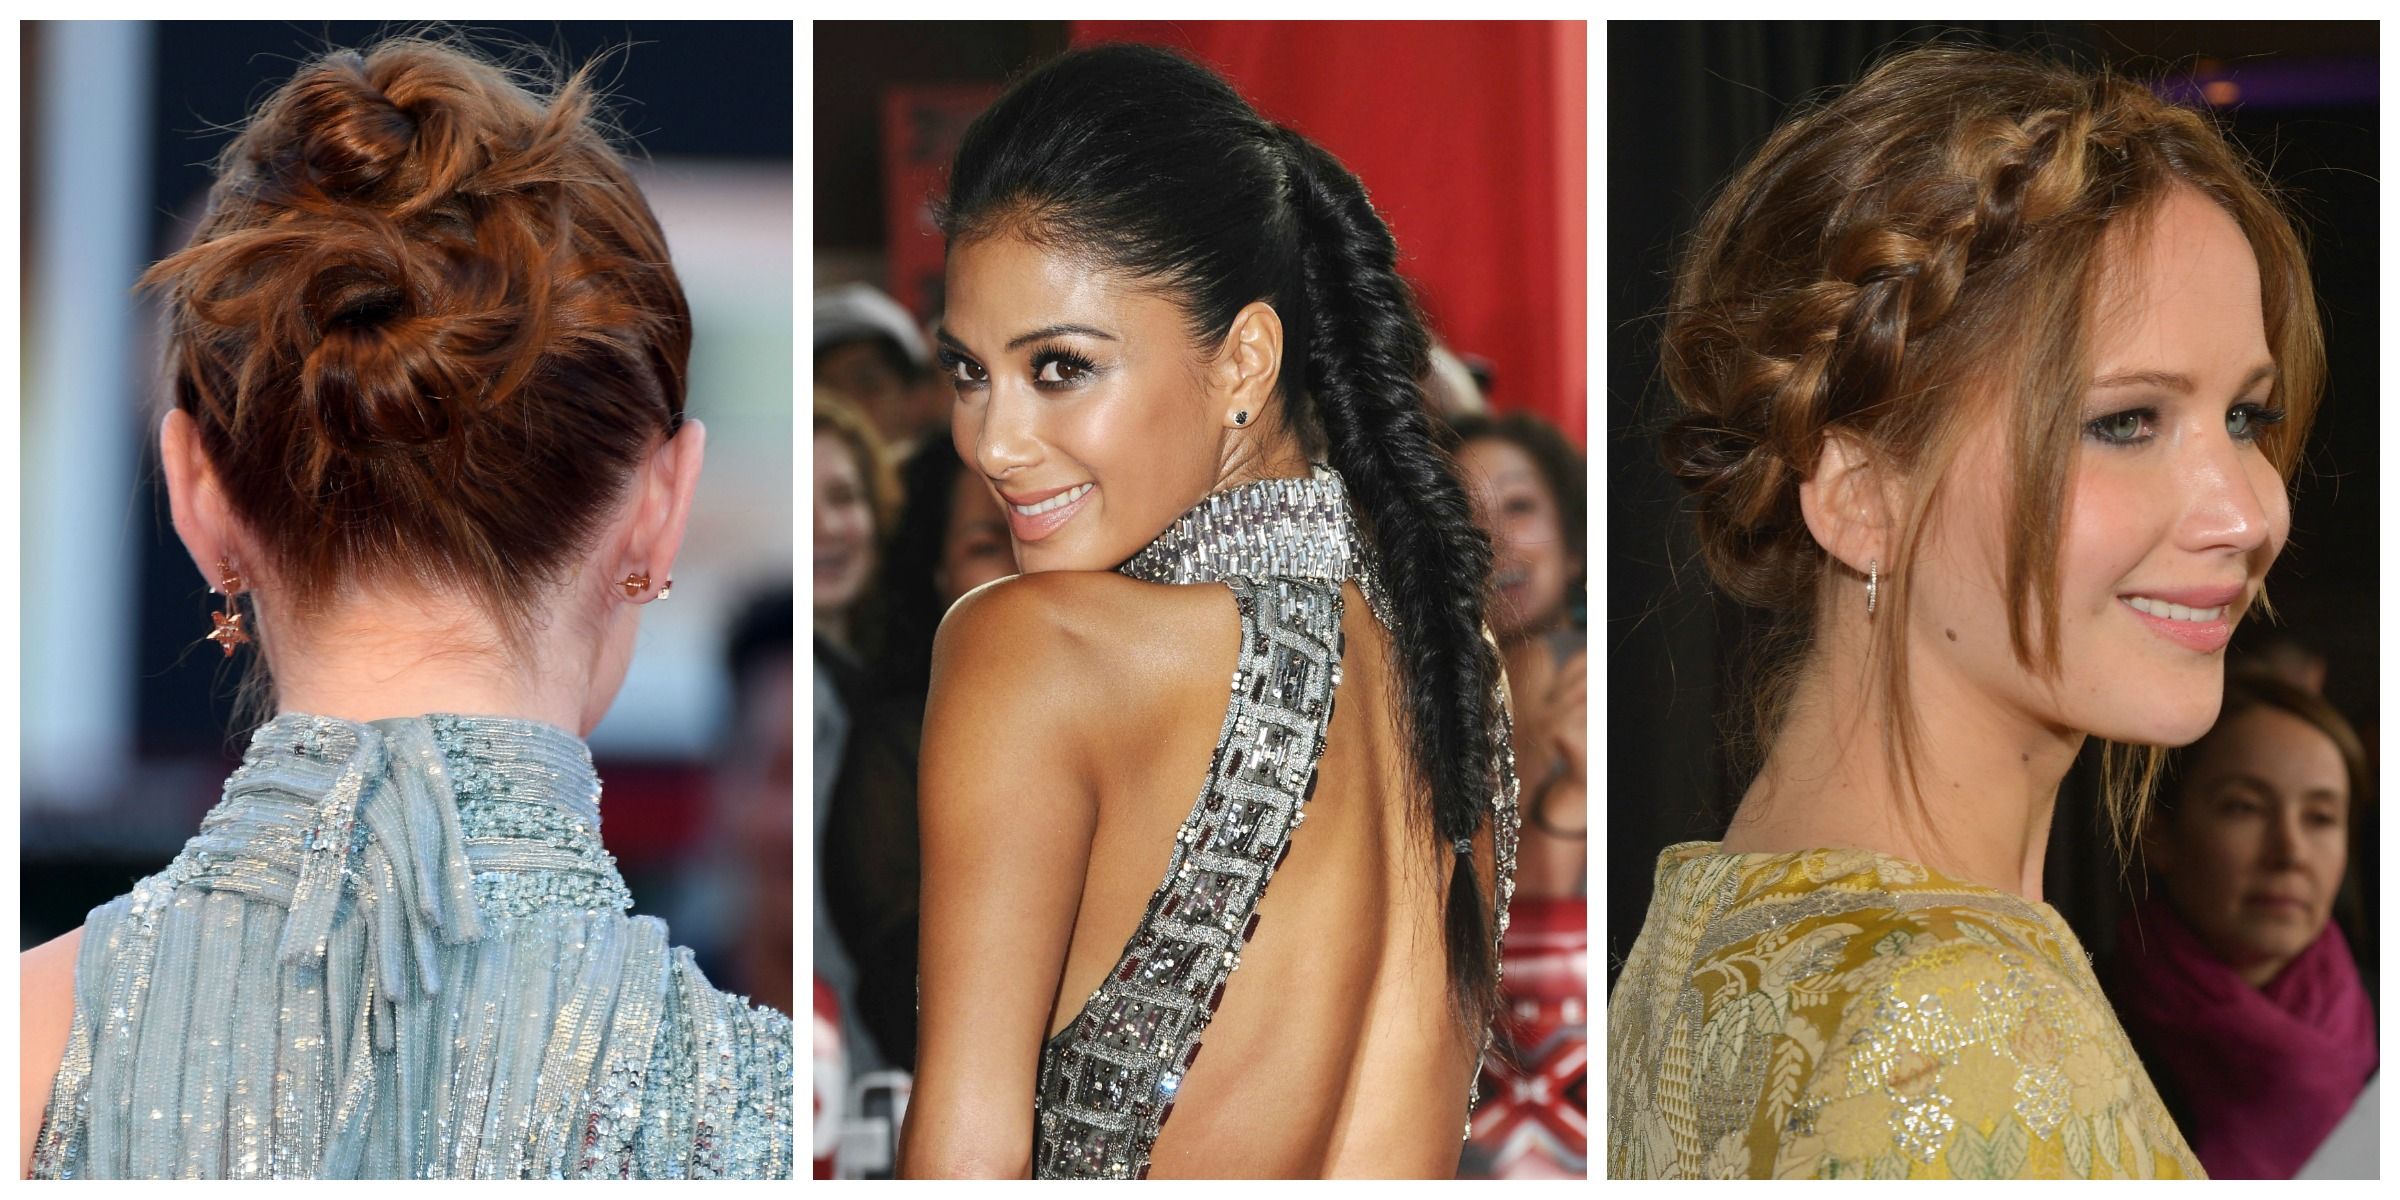 10 Best Updos for Long Hair - How to Do an Updo